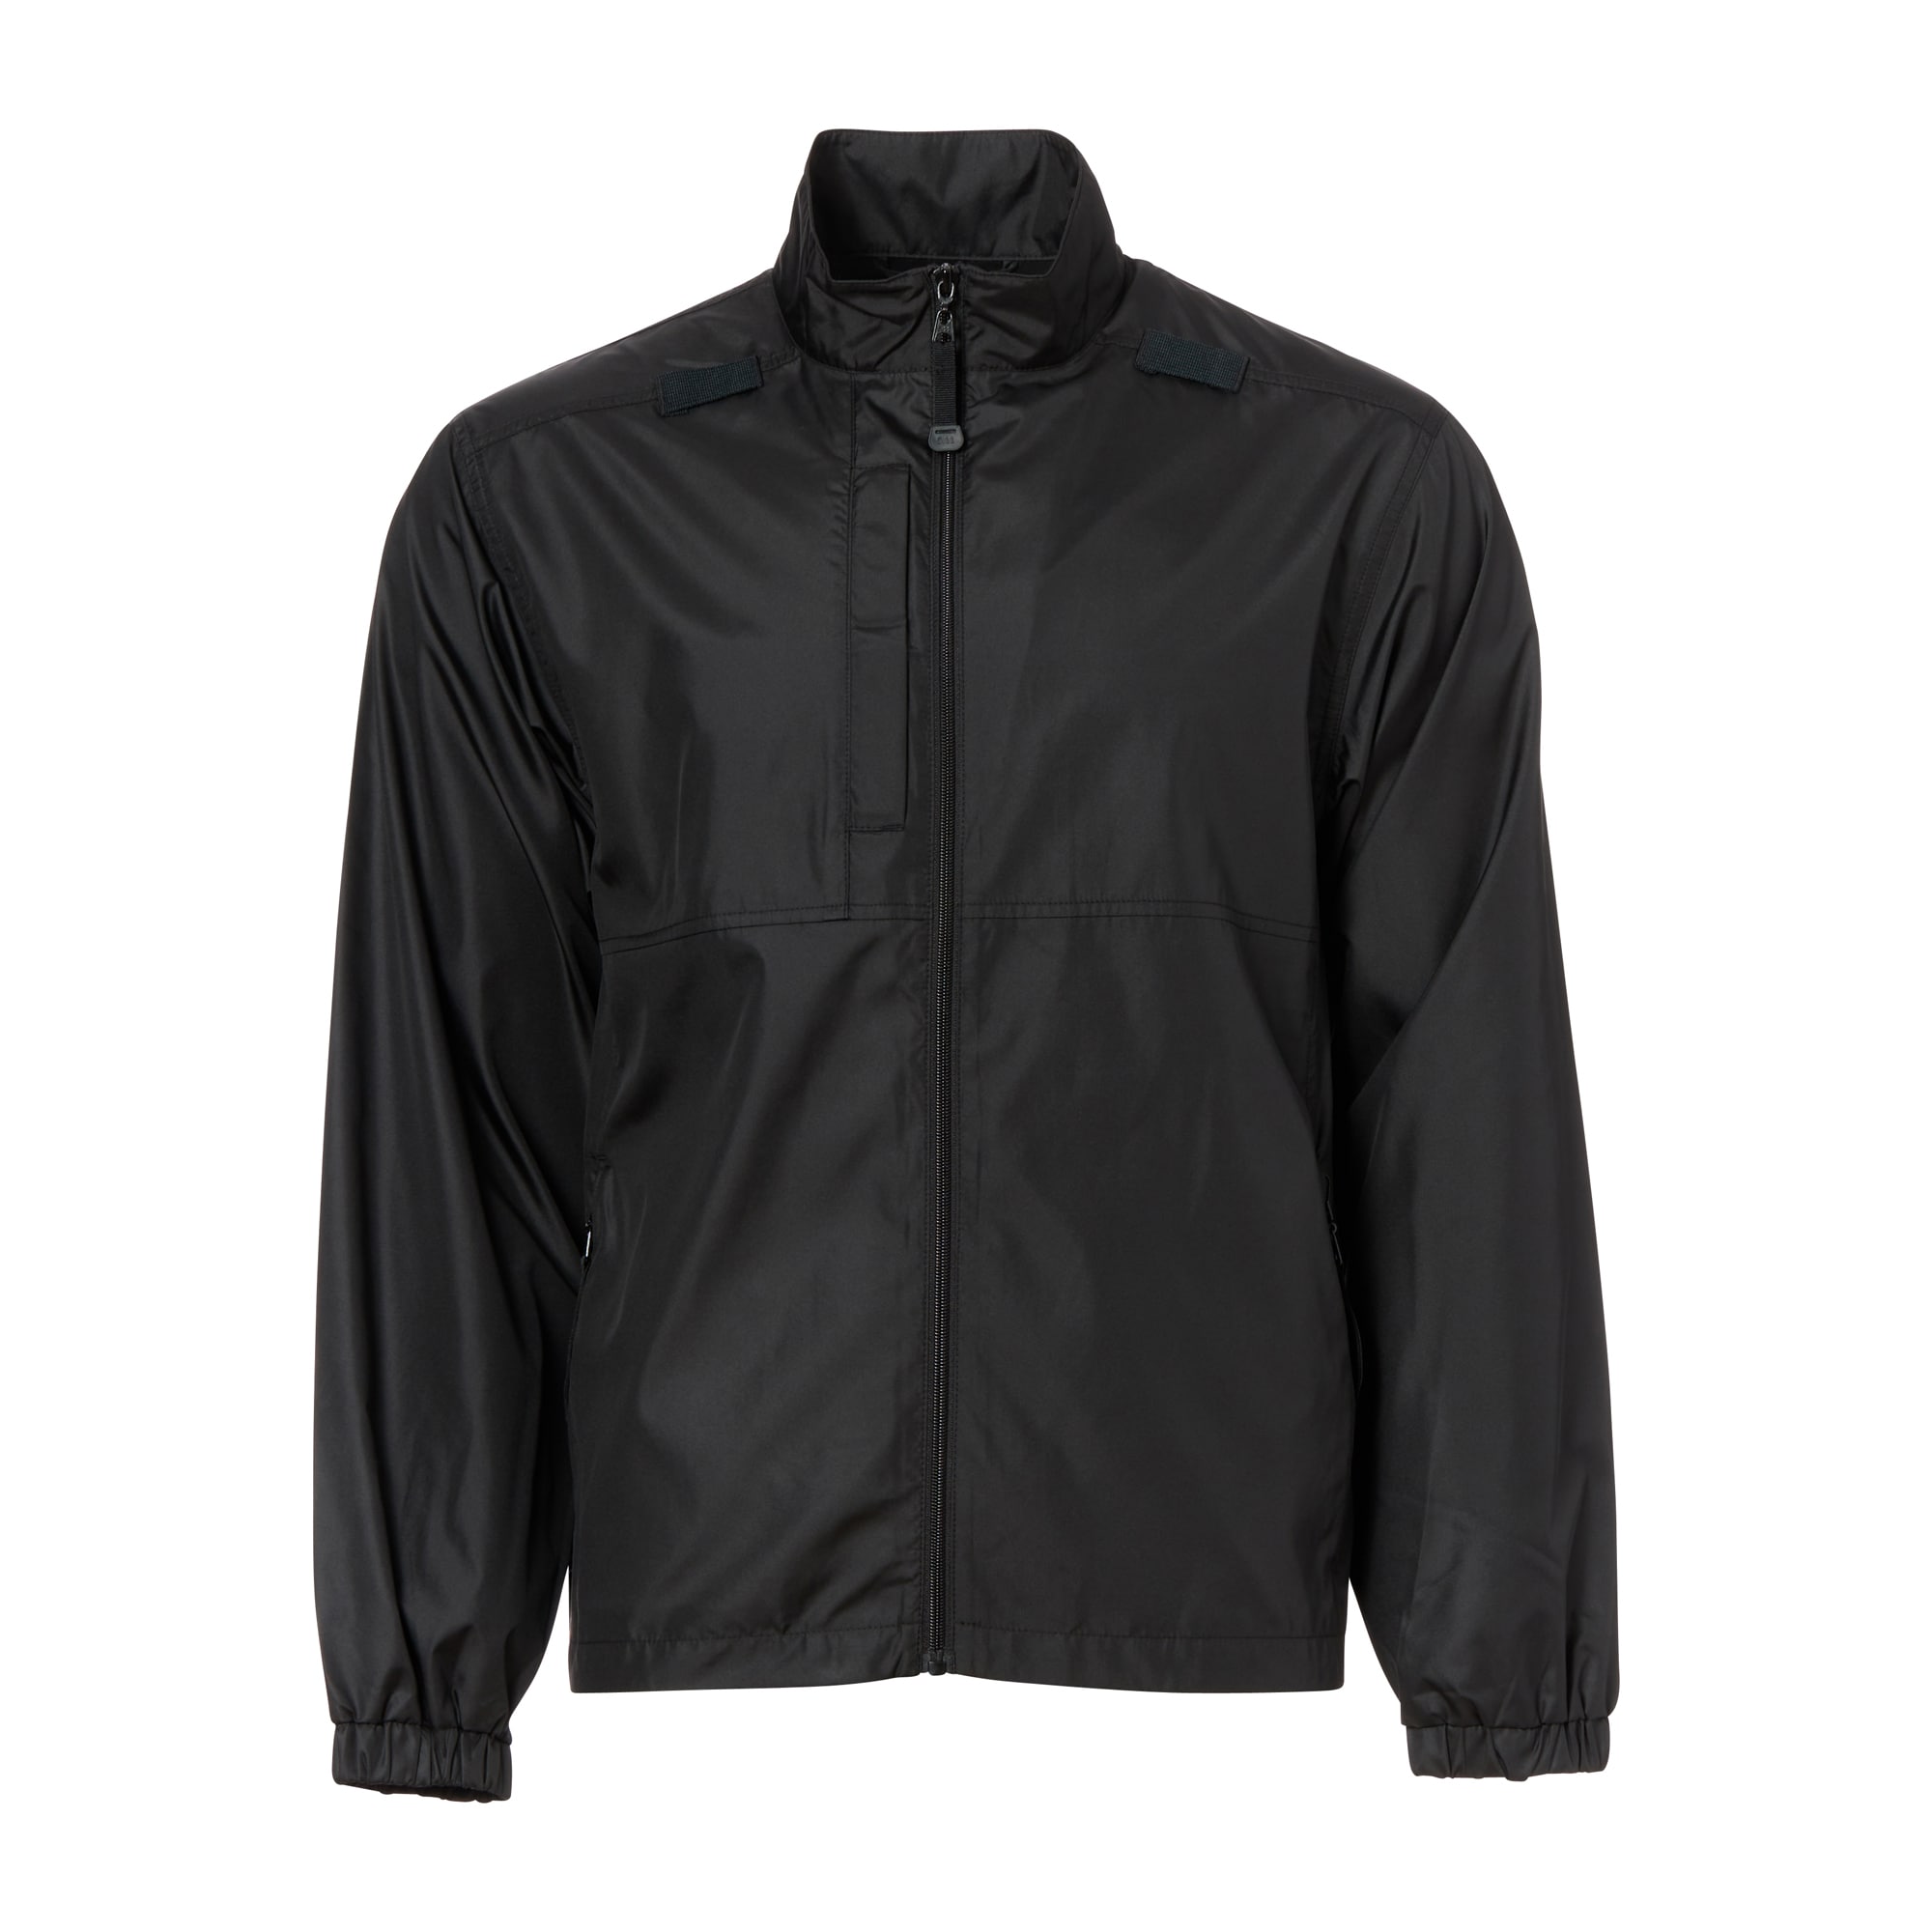 Purchase the 5.11 Packable Jacket black by ASMC